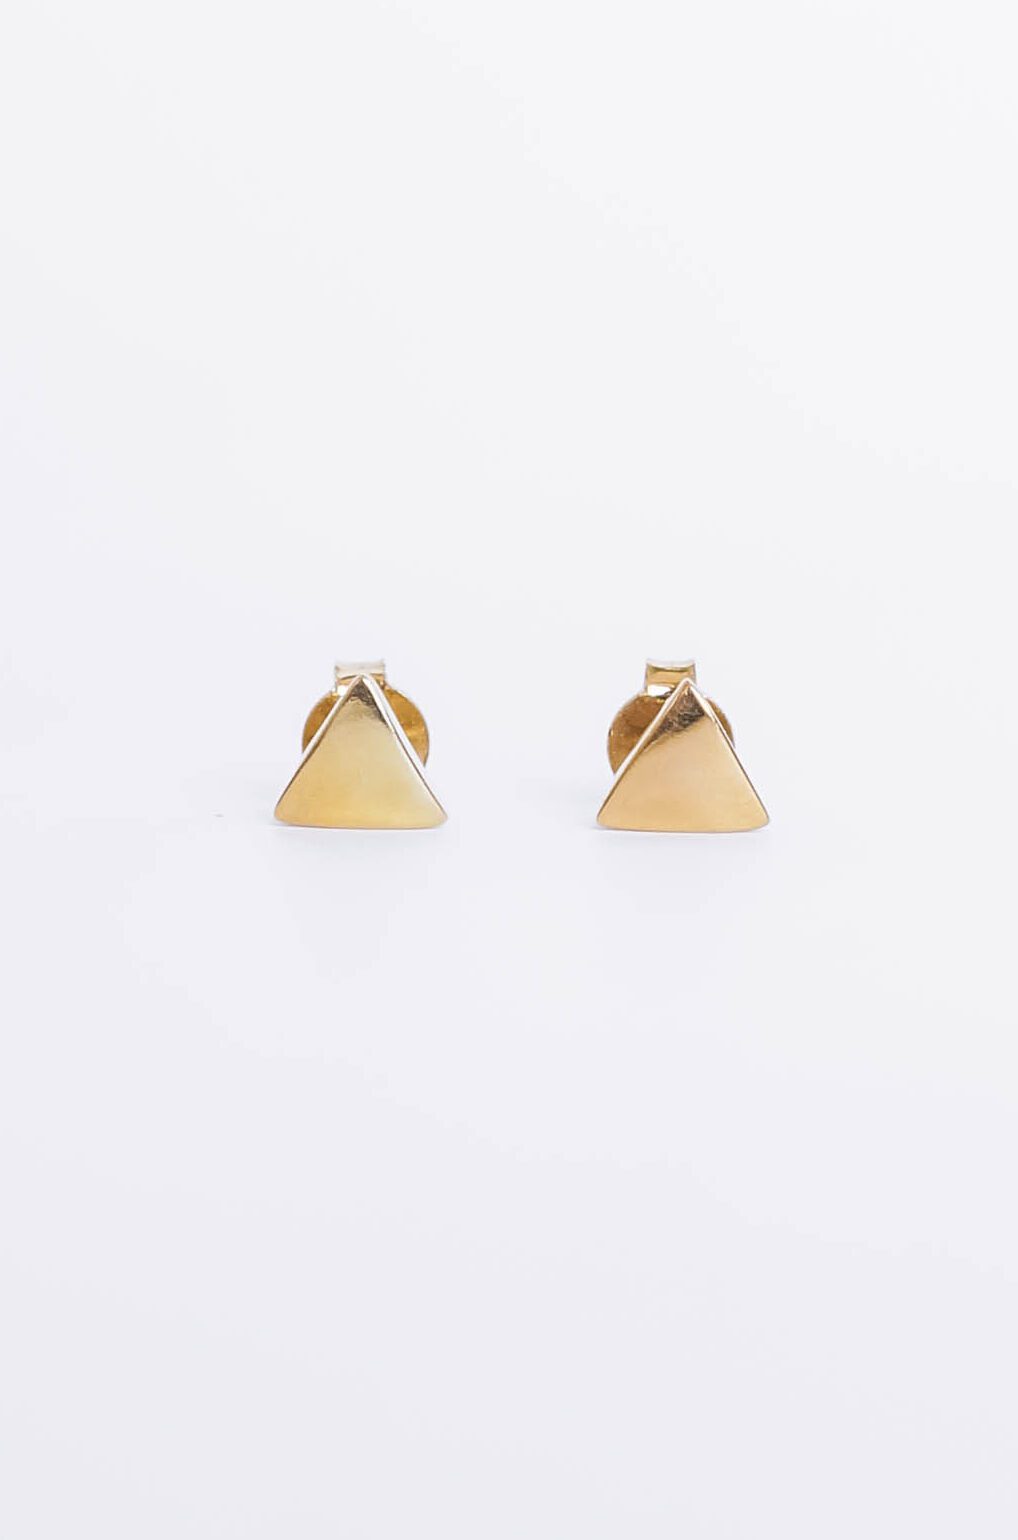 Gold-plated silver triangle earrings - GG Unique